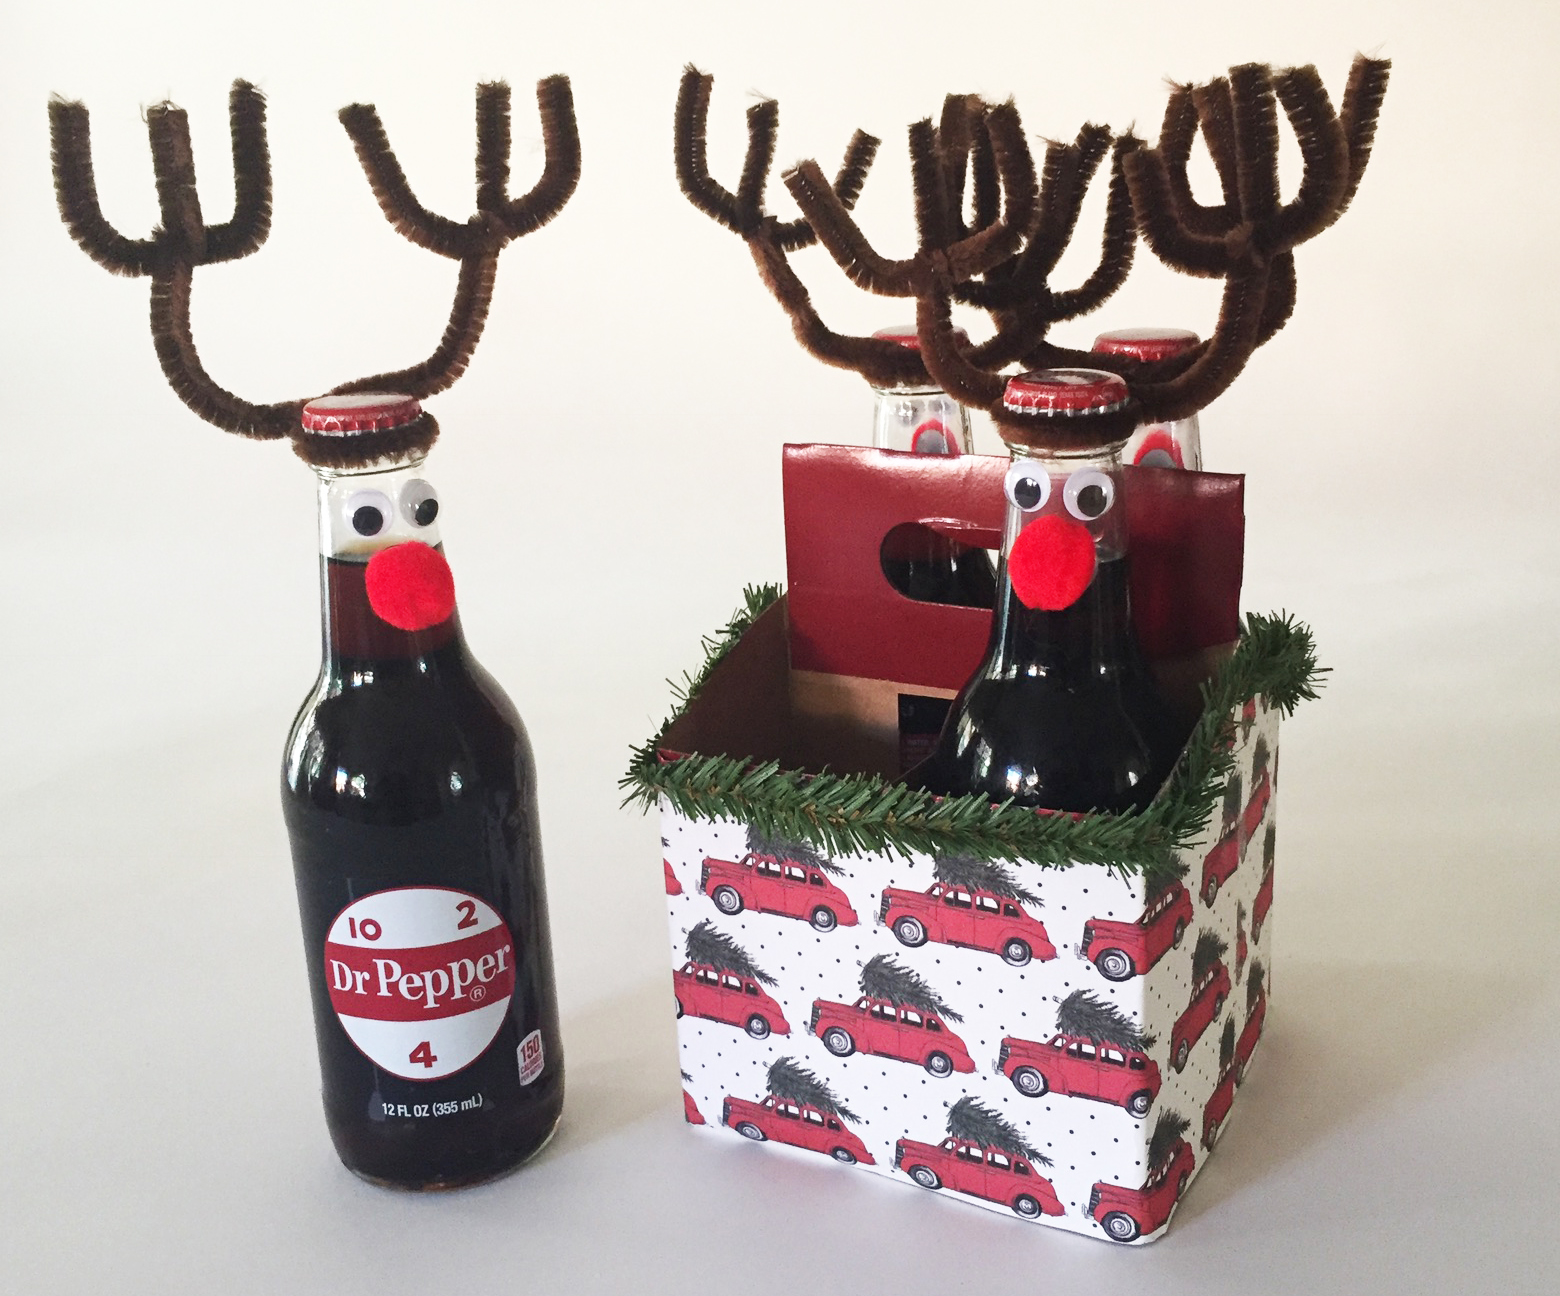 Thanks for stopping by and checking out the reindeer bottle gift wrap idea!...